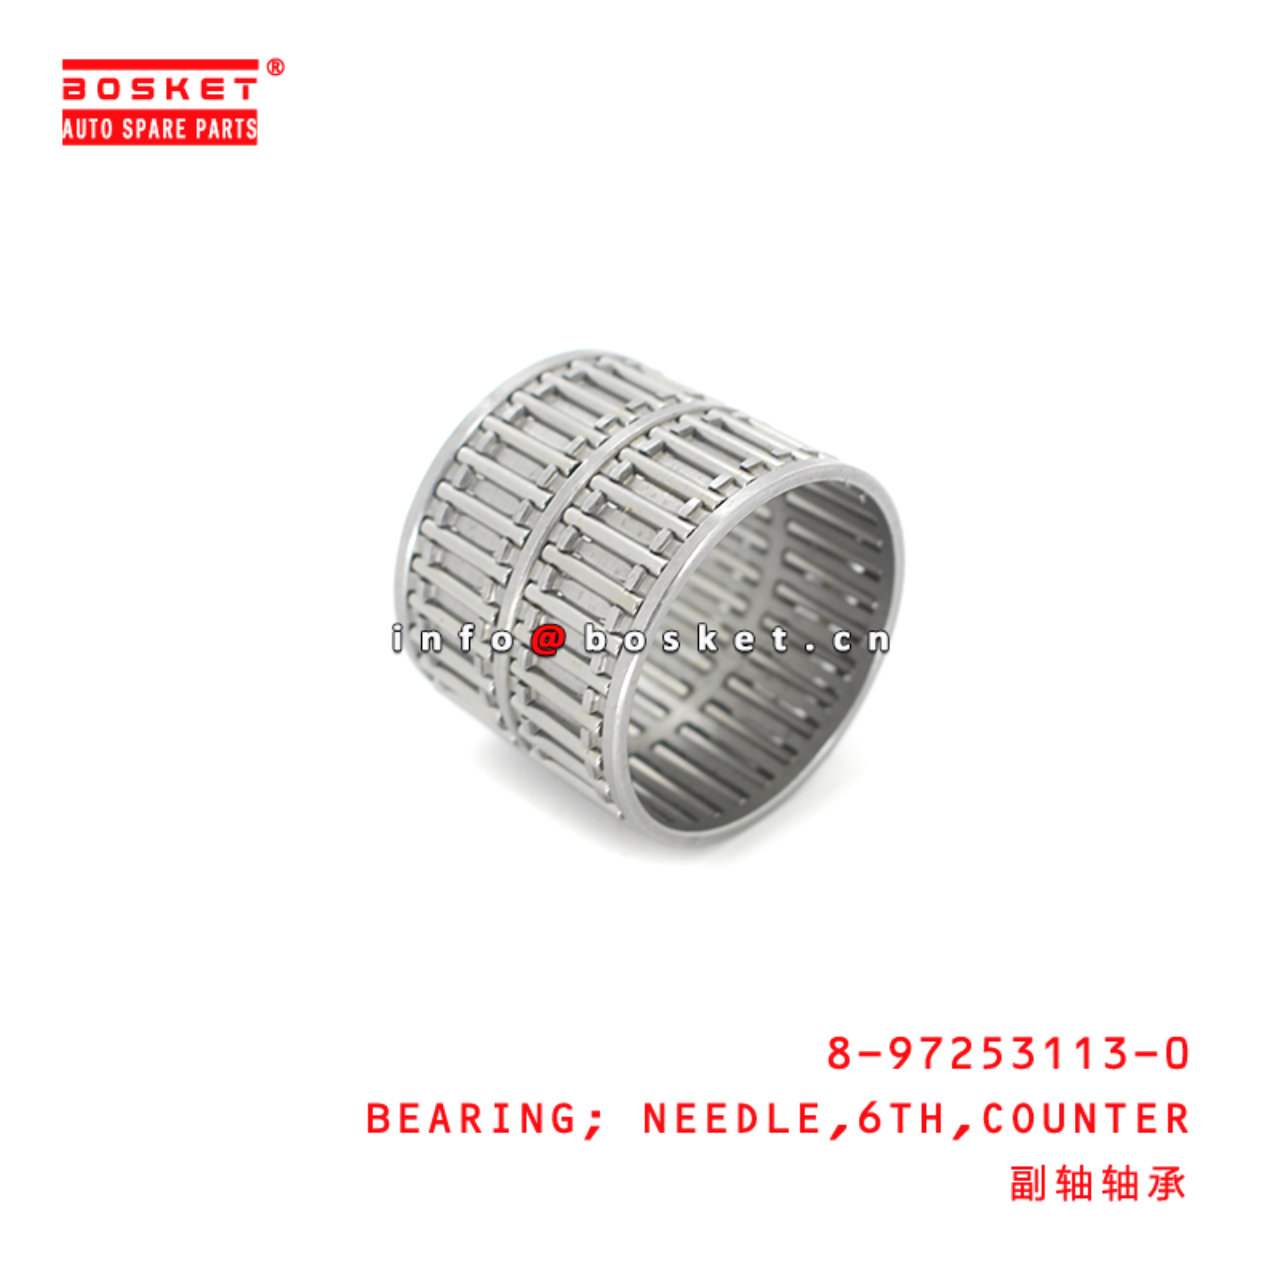 8-97253113-0 Counter Sixth Needle Bearing Suitable for ISUZU FRR 8972531130